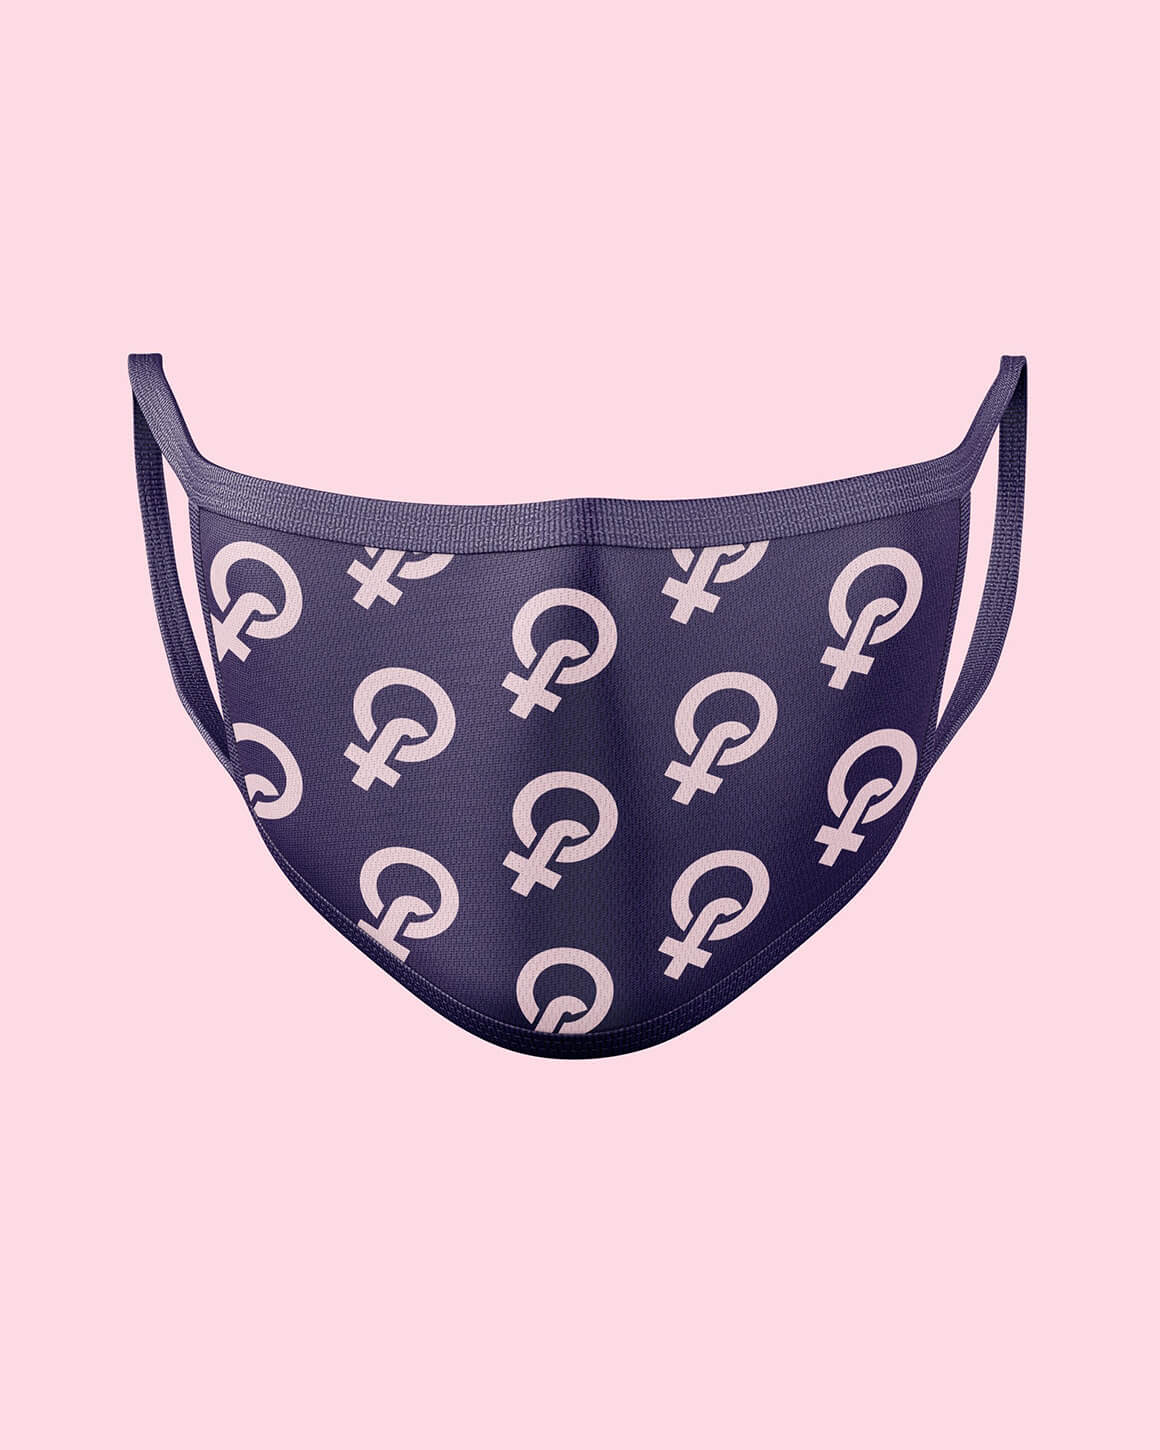 Feminist face mask with female symbol pattern on pink background 